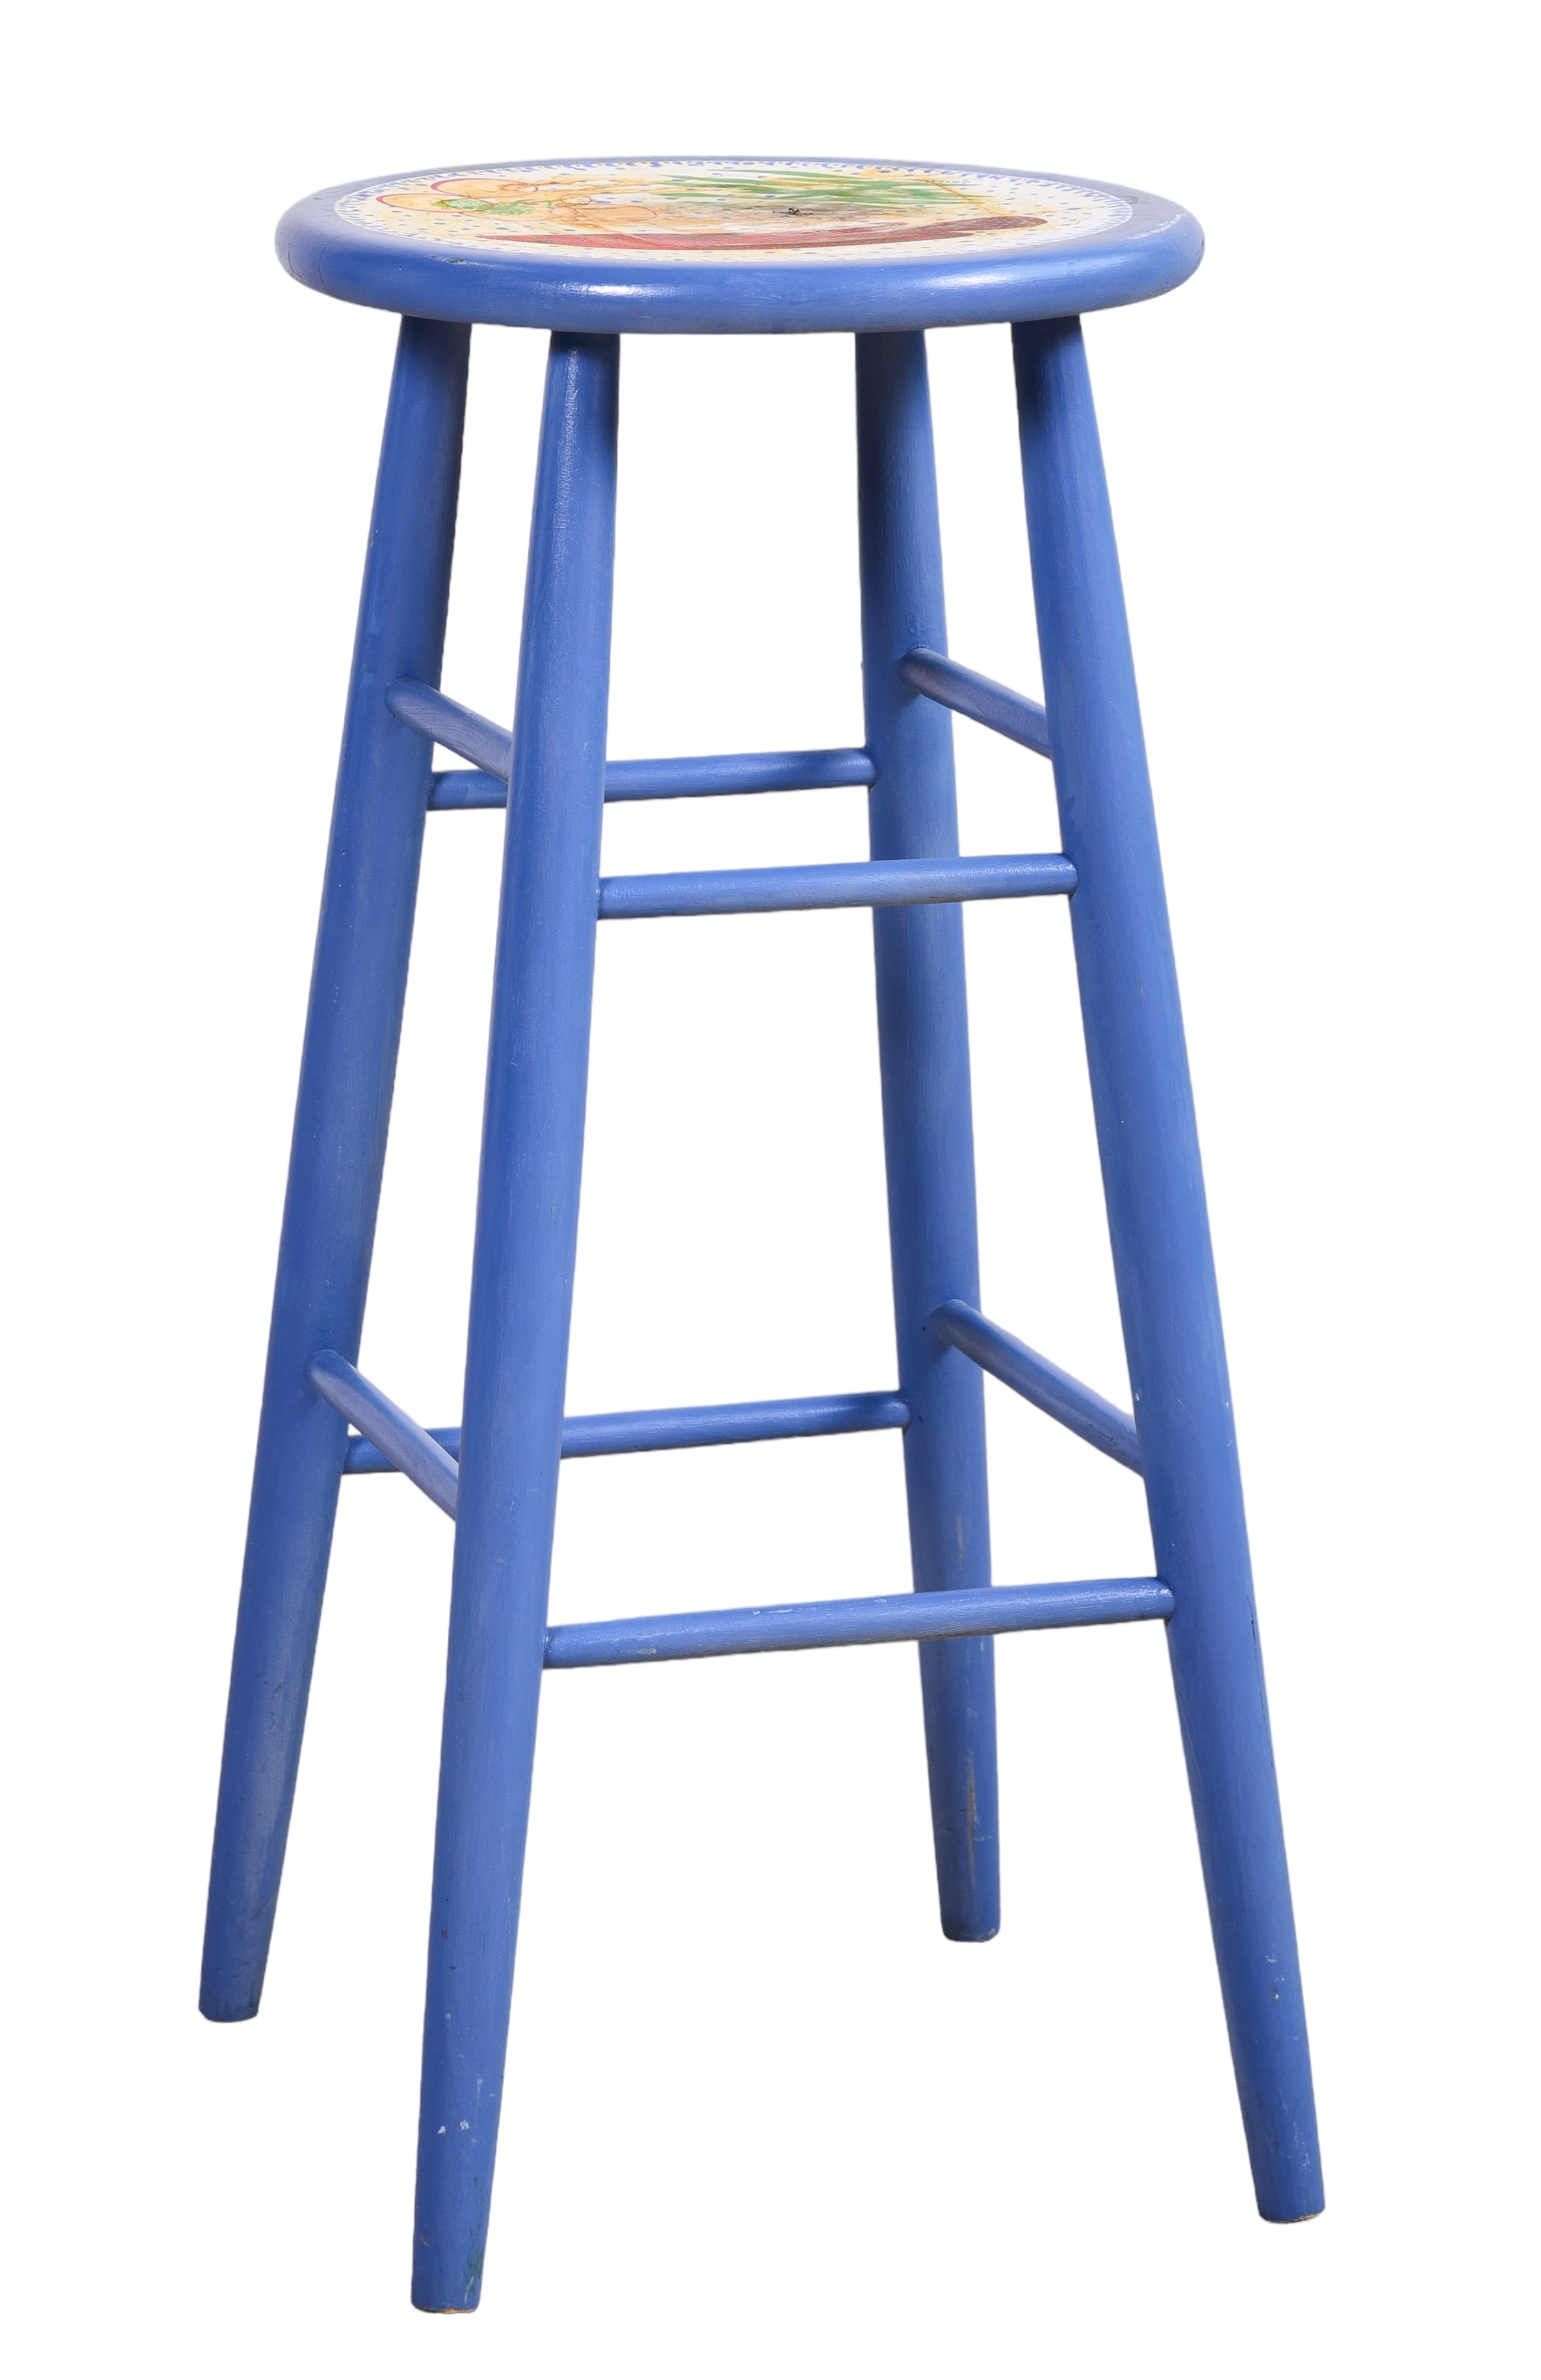 Paint decorated barstool, blue